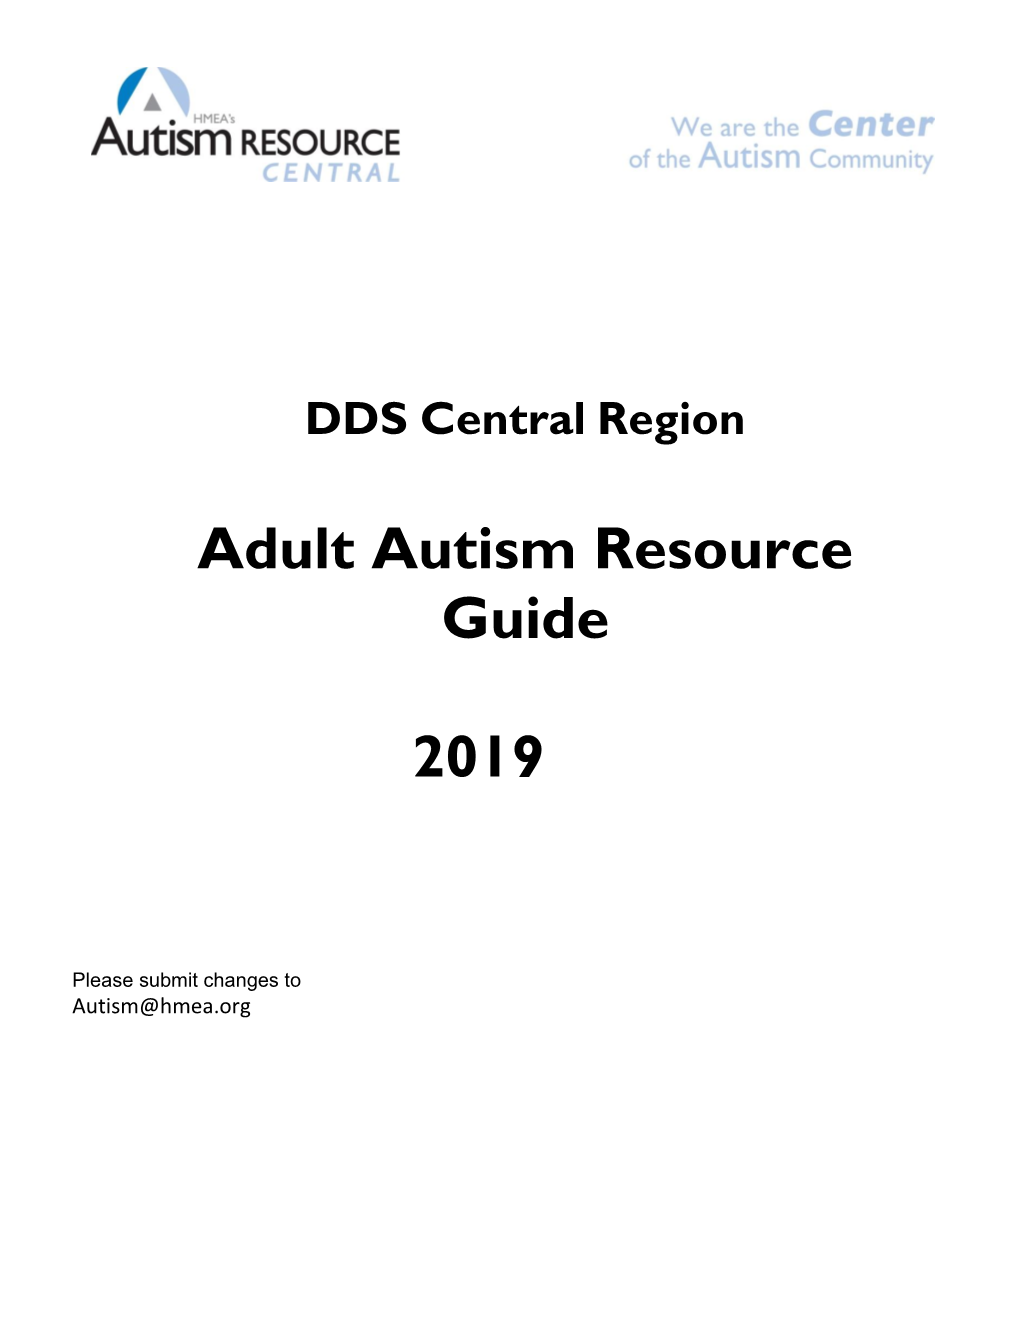 Adult Autism Resource Guide 2019